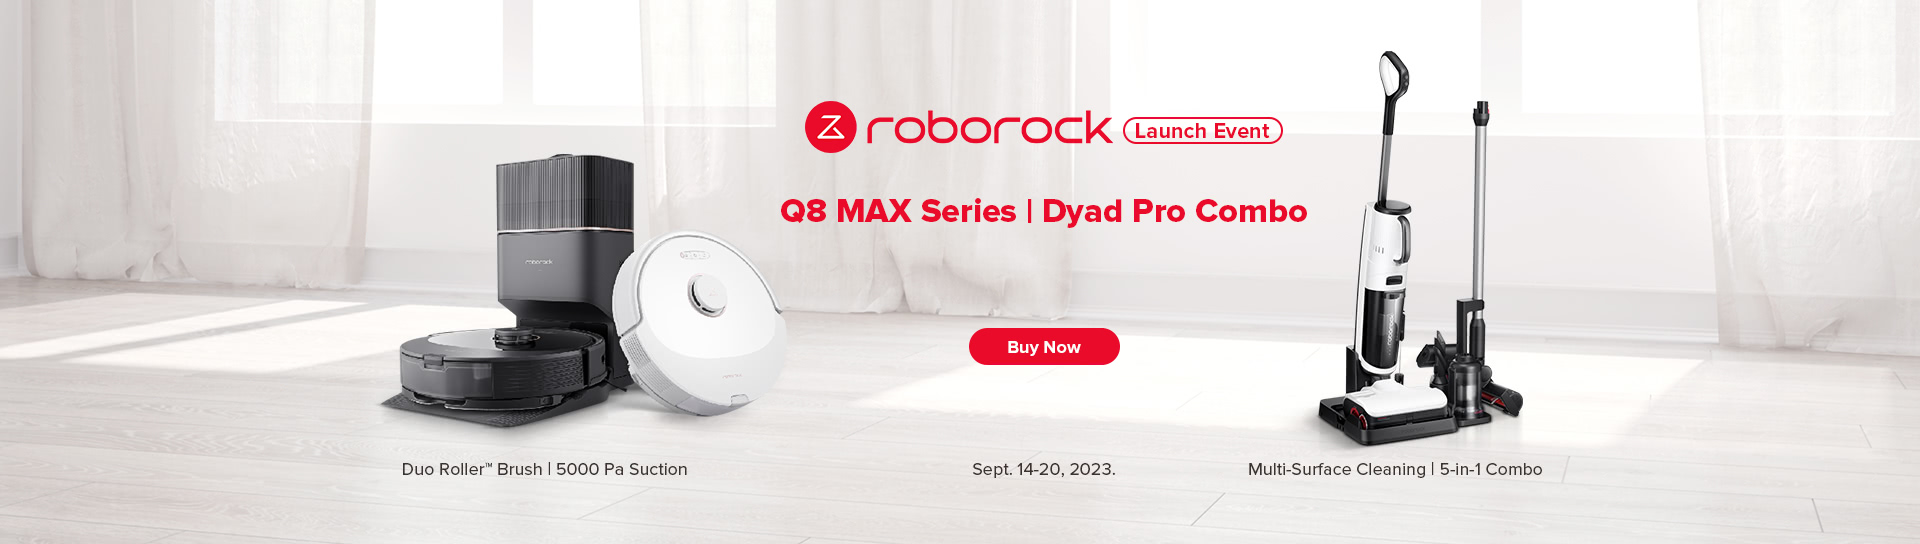 Q8 Max Series  Dyad Pro Combo - Discover Innovative Cleaning